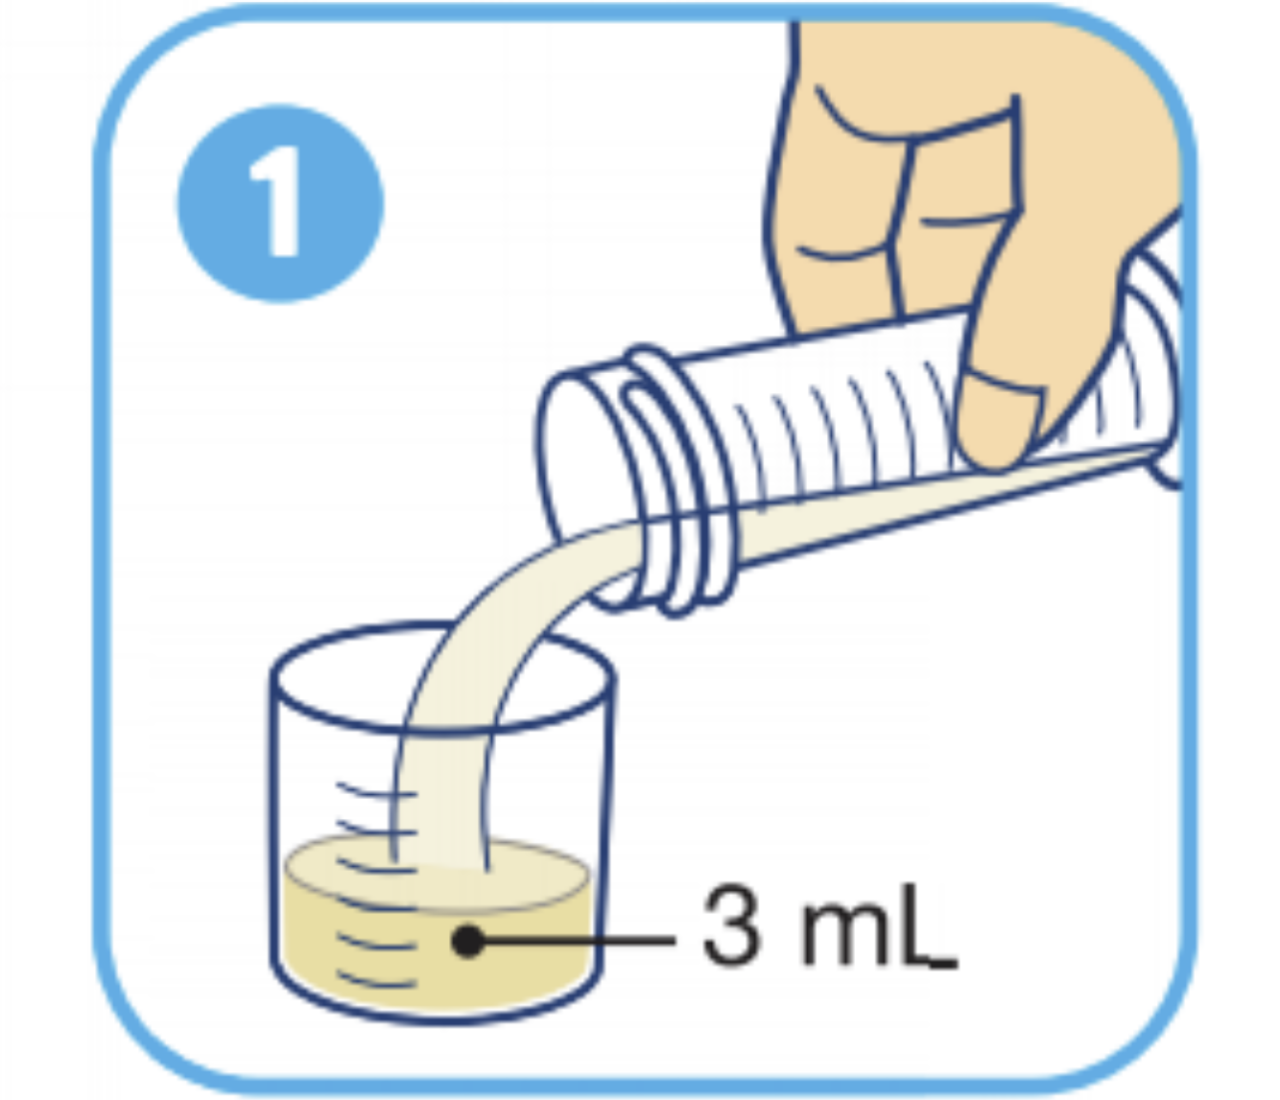 Pour 3 mL breast milk, donor milk, infant formula, sterile water or 5% glucose water (sterile) into mixing container